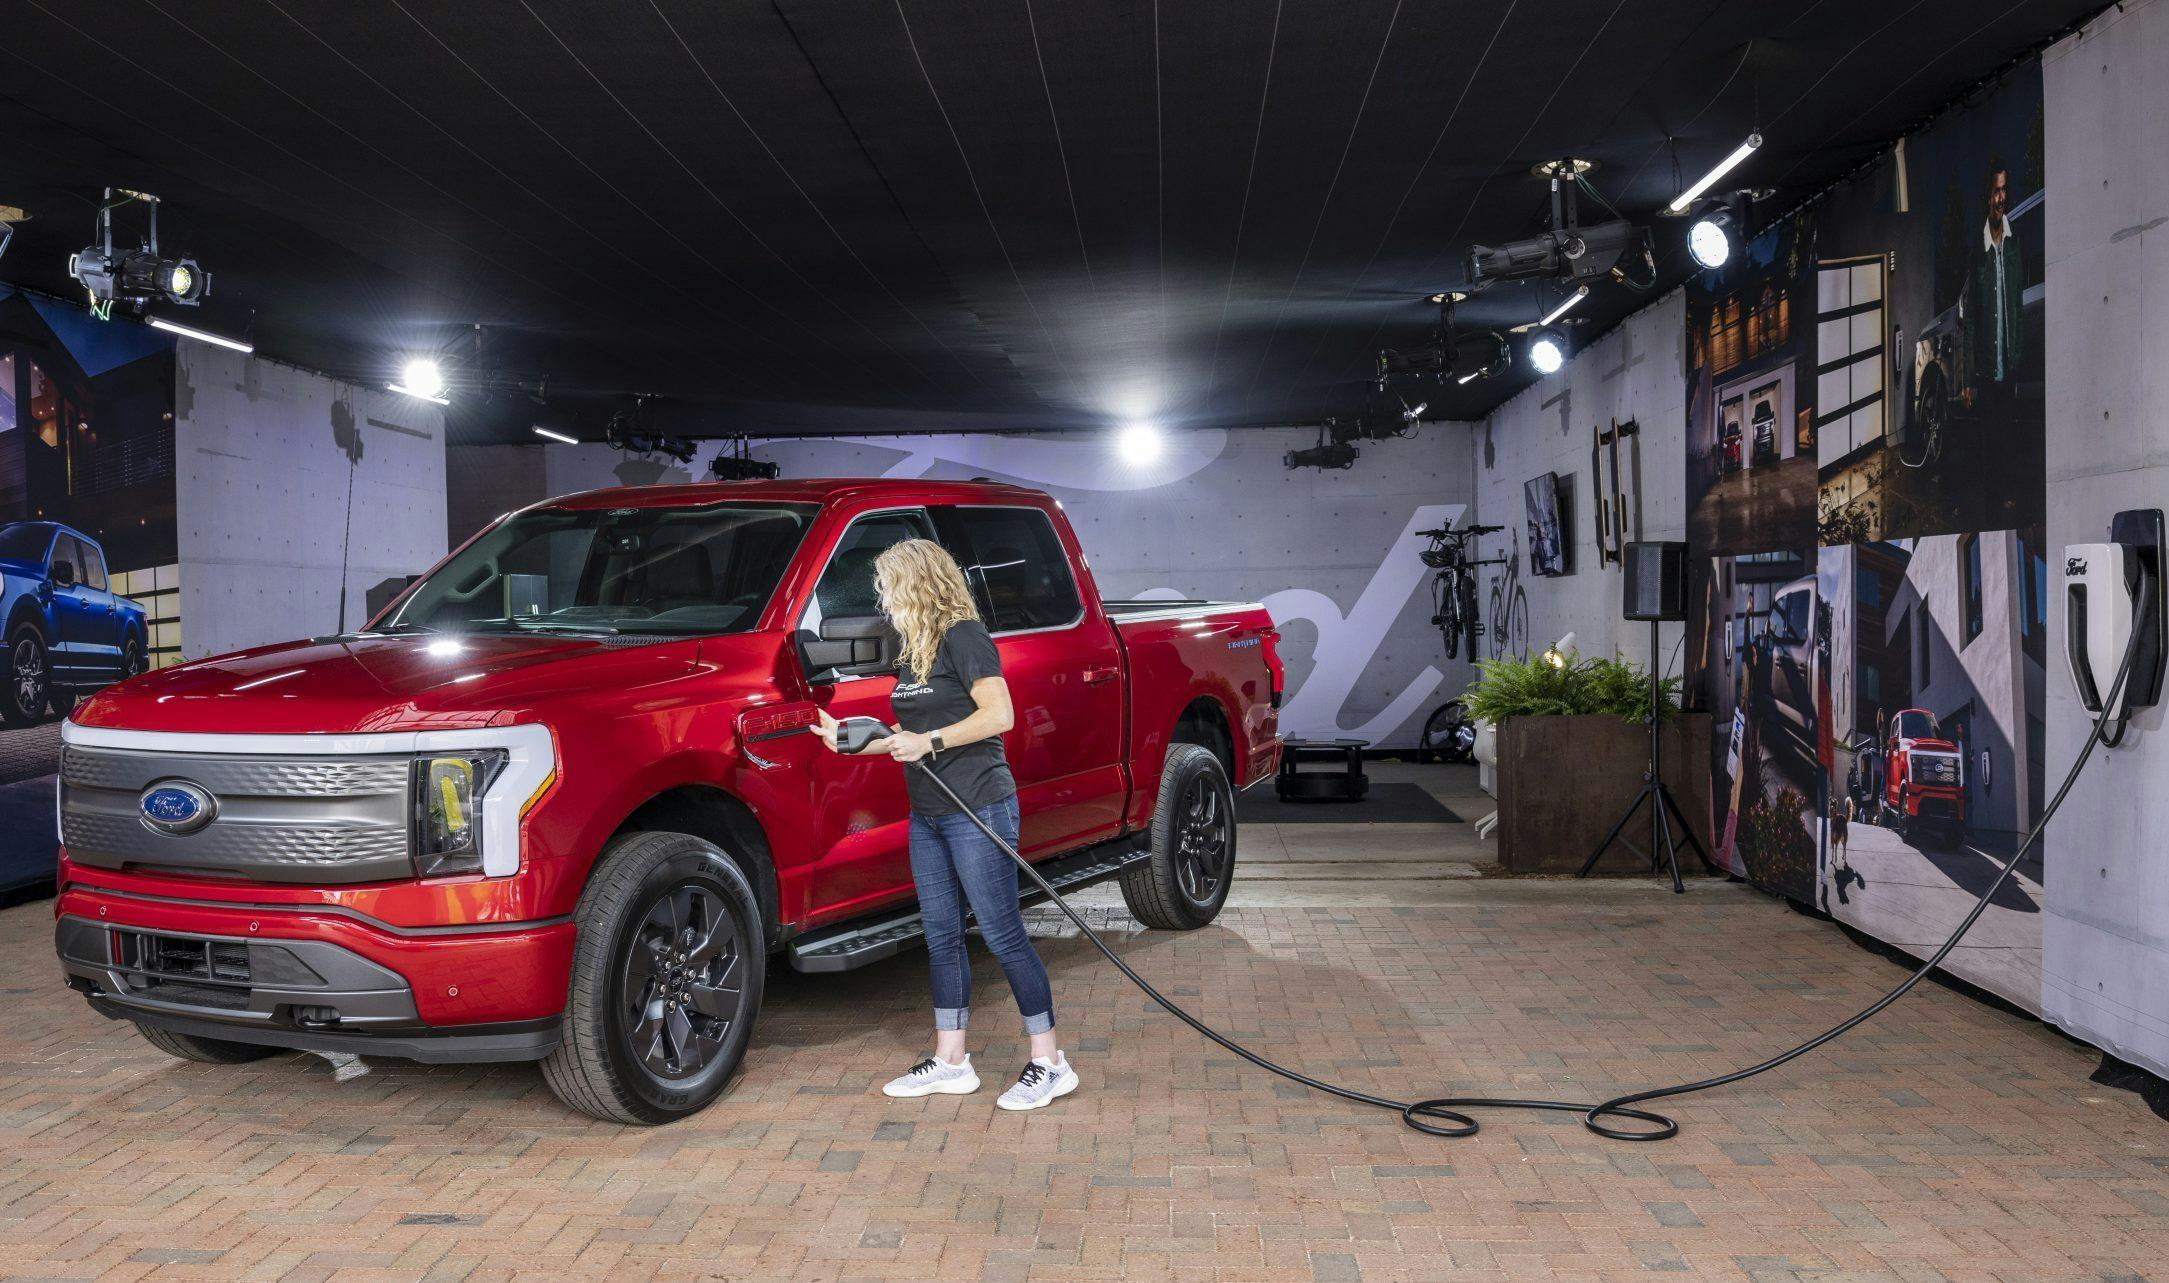 2022 F-150 Lightning charge your home